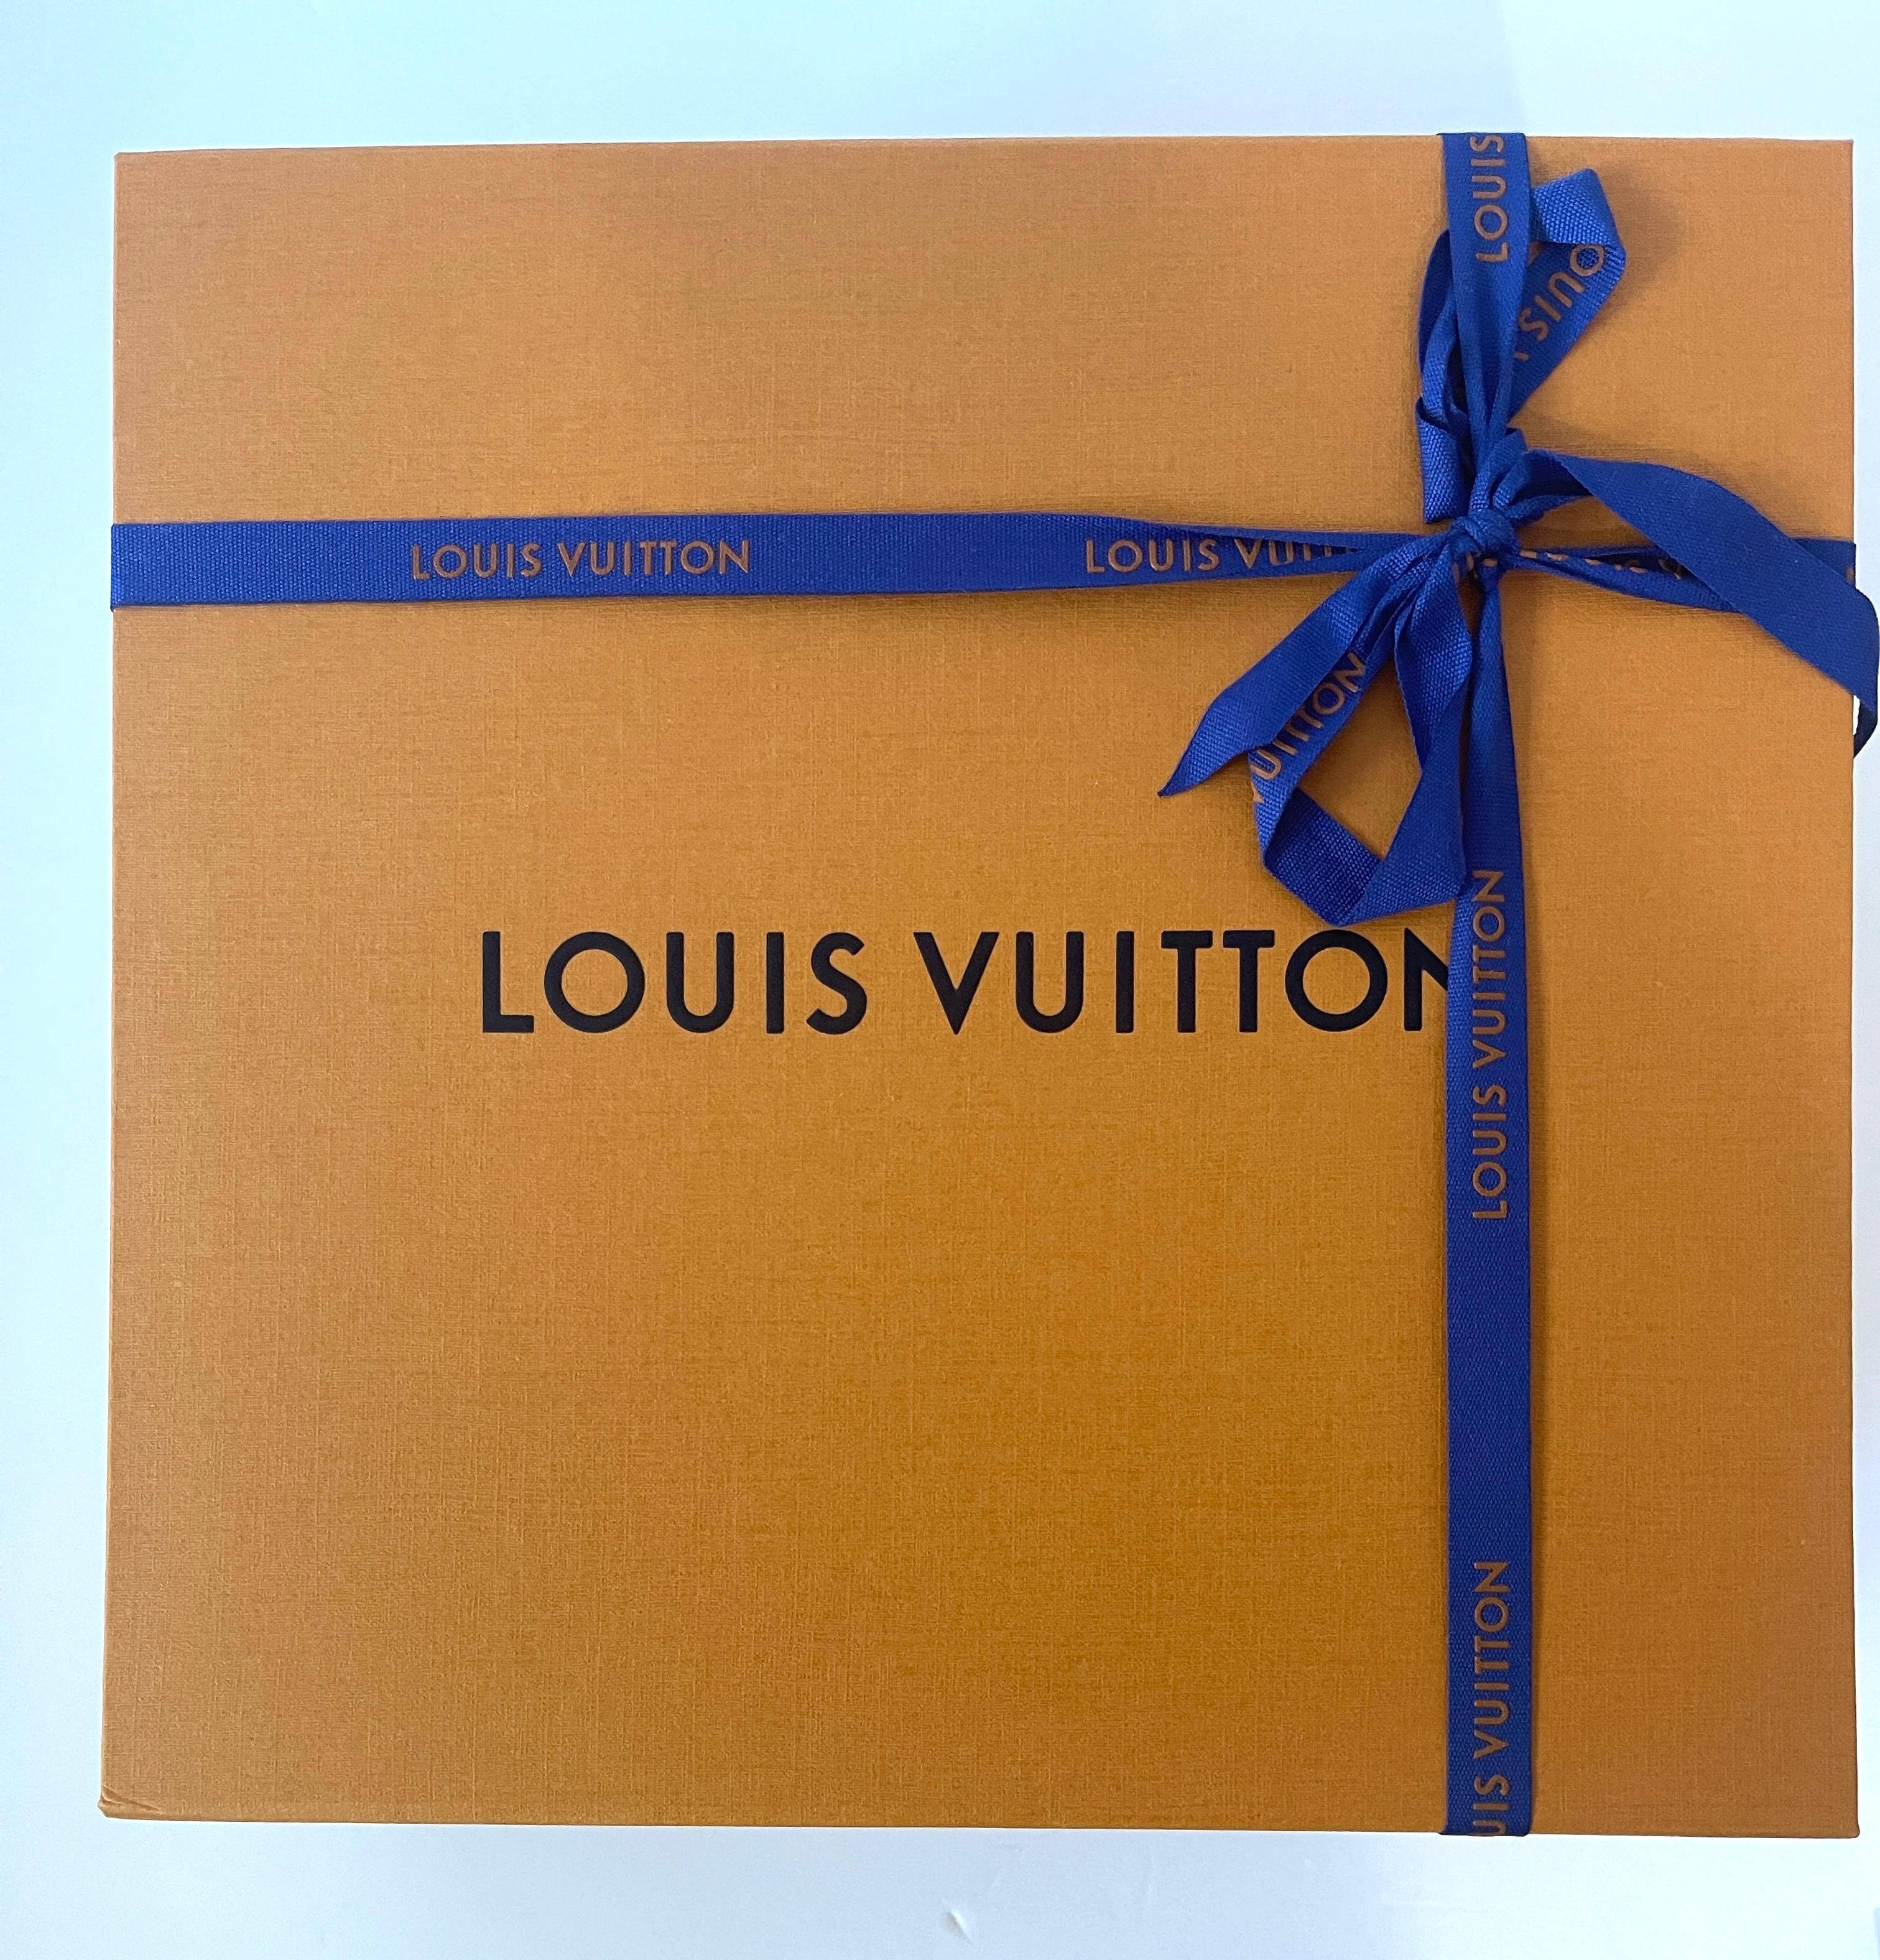 Louis Vuitton
So en vogue , the new BB size
The Papillon BB

Just darling!
7.9 x 3.9 x 3.9 inches
(length x Height x Width)
Snow White with Gold hardware
Quilted and embroidered smooth calf leather
Nylon strap
Jacquard with Nano Monogram